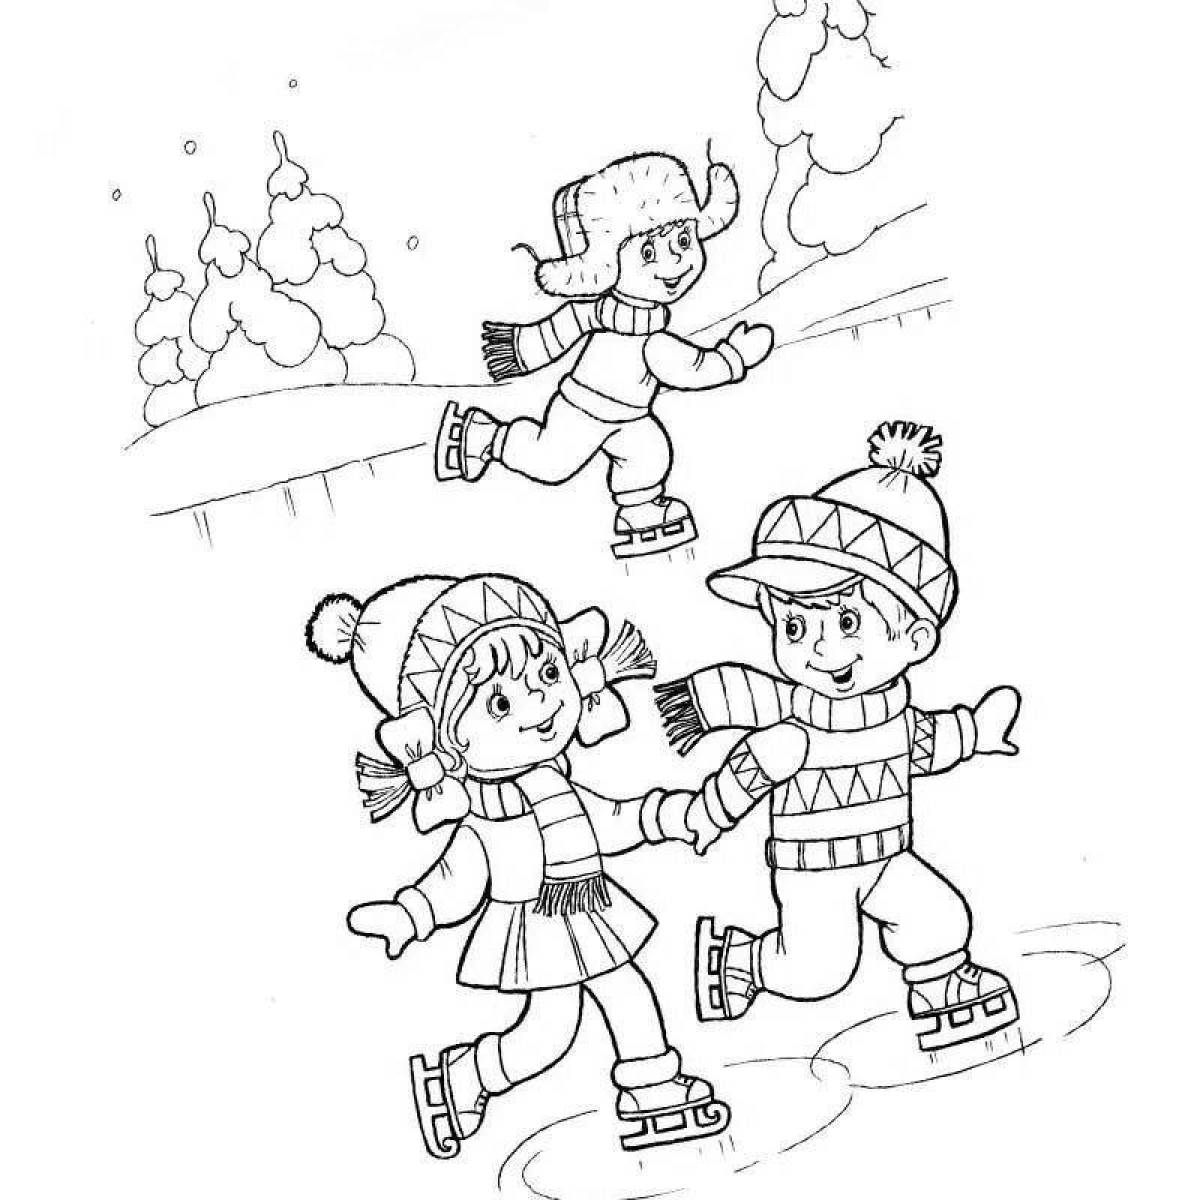 Animated children playing in winter